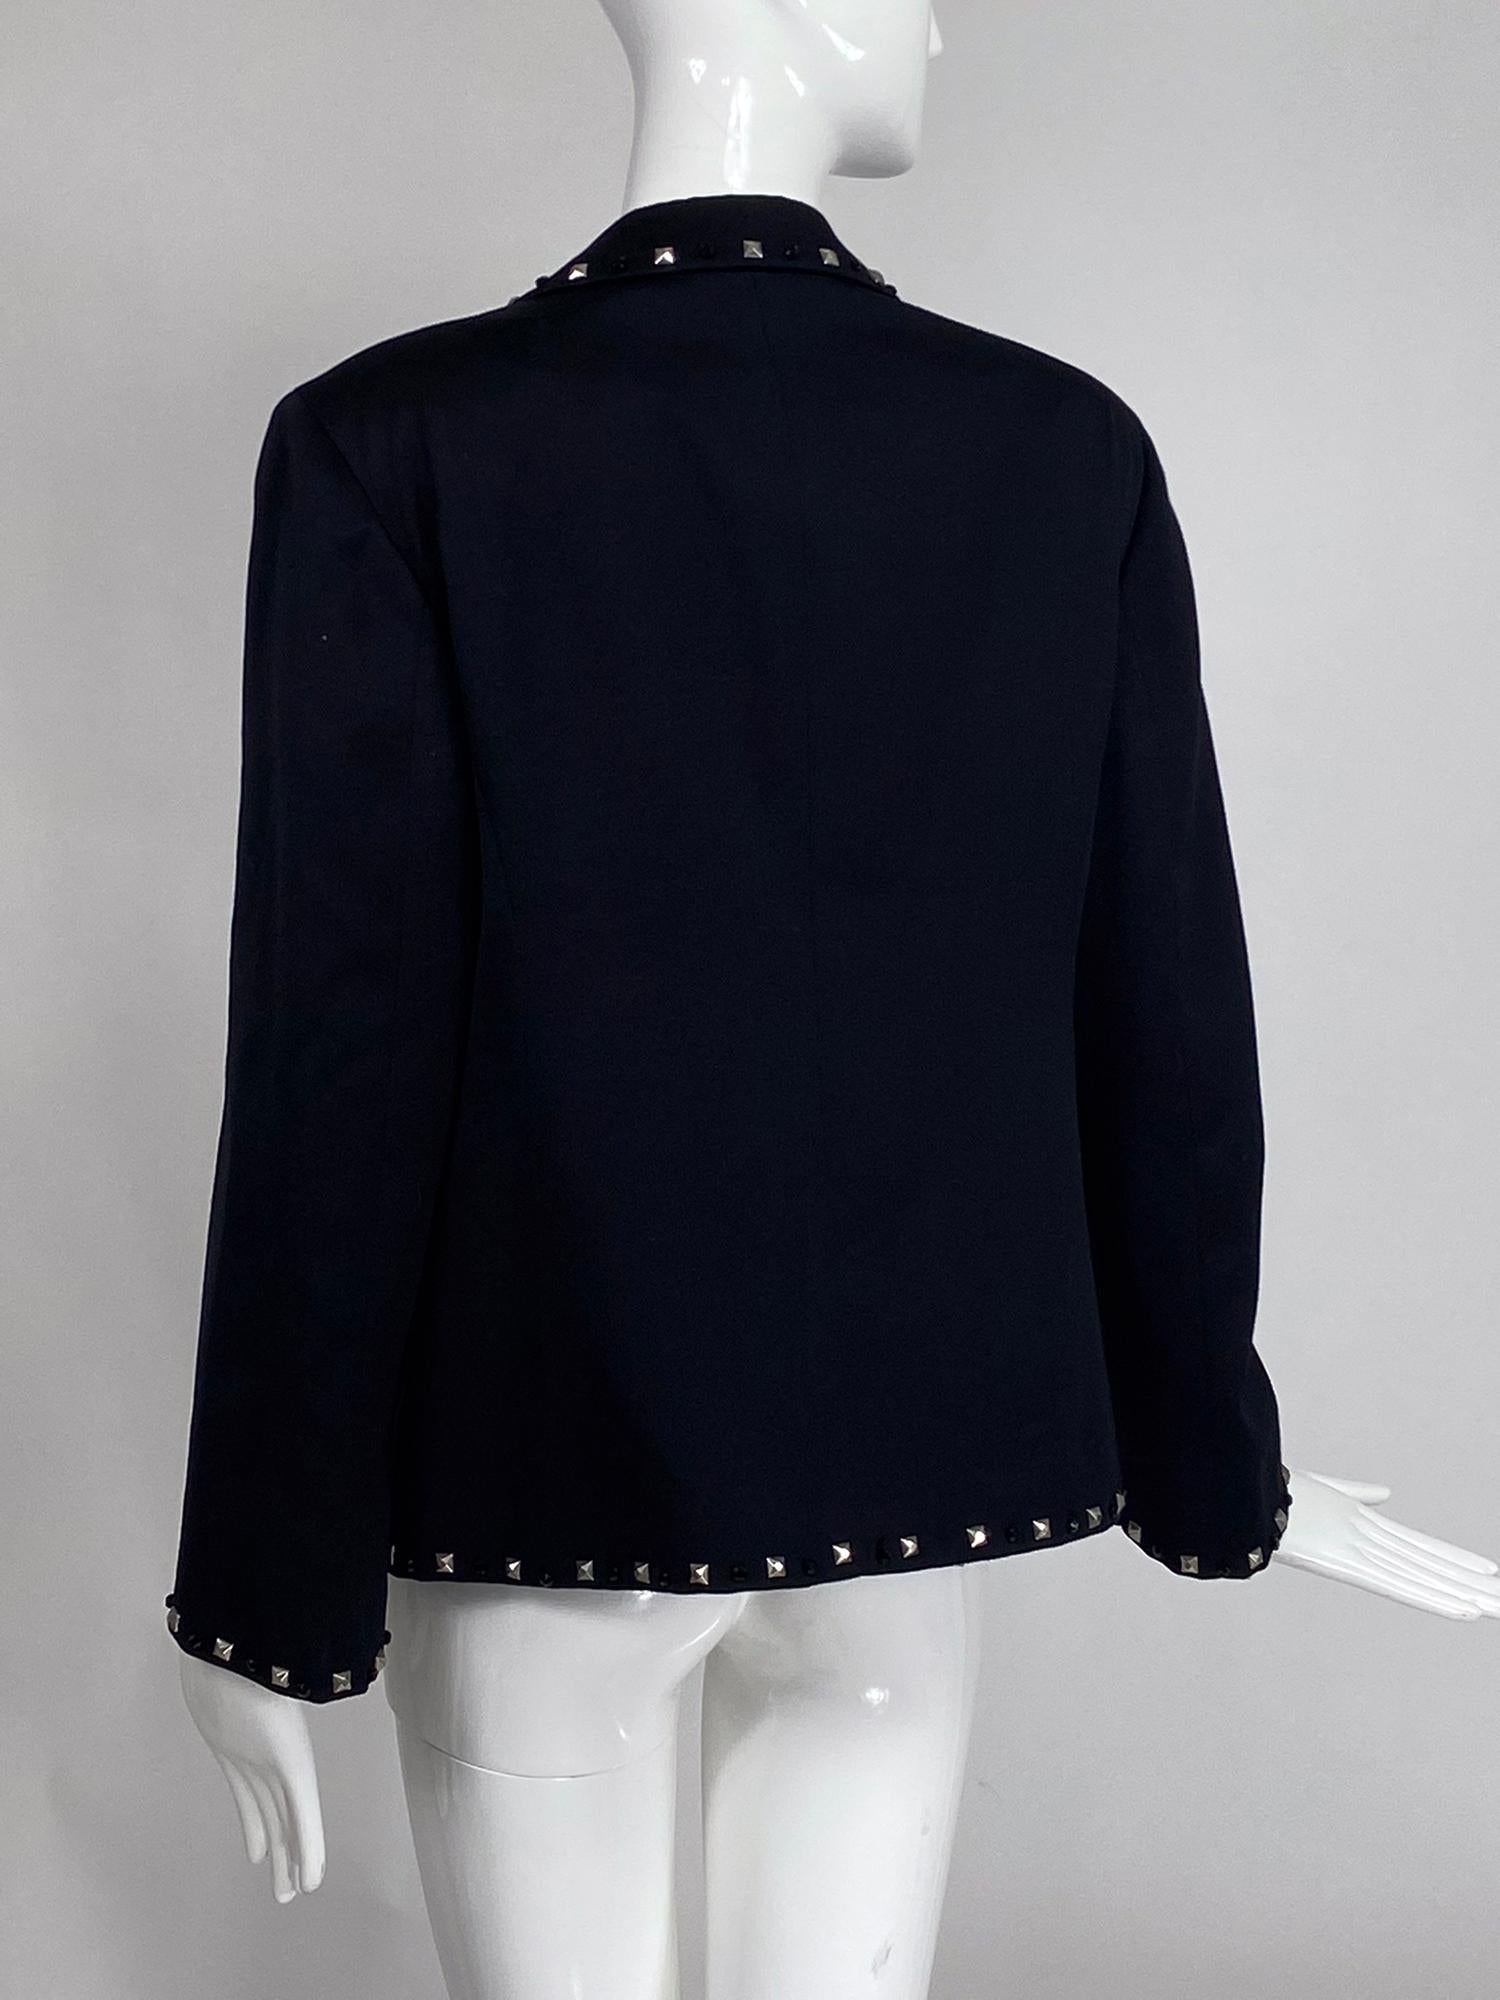 Women's Gianni Versace Couture Black Wool Bead & Stud Trimmed Jacket For Sale